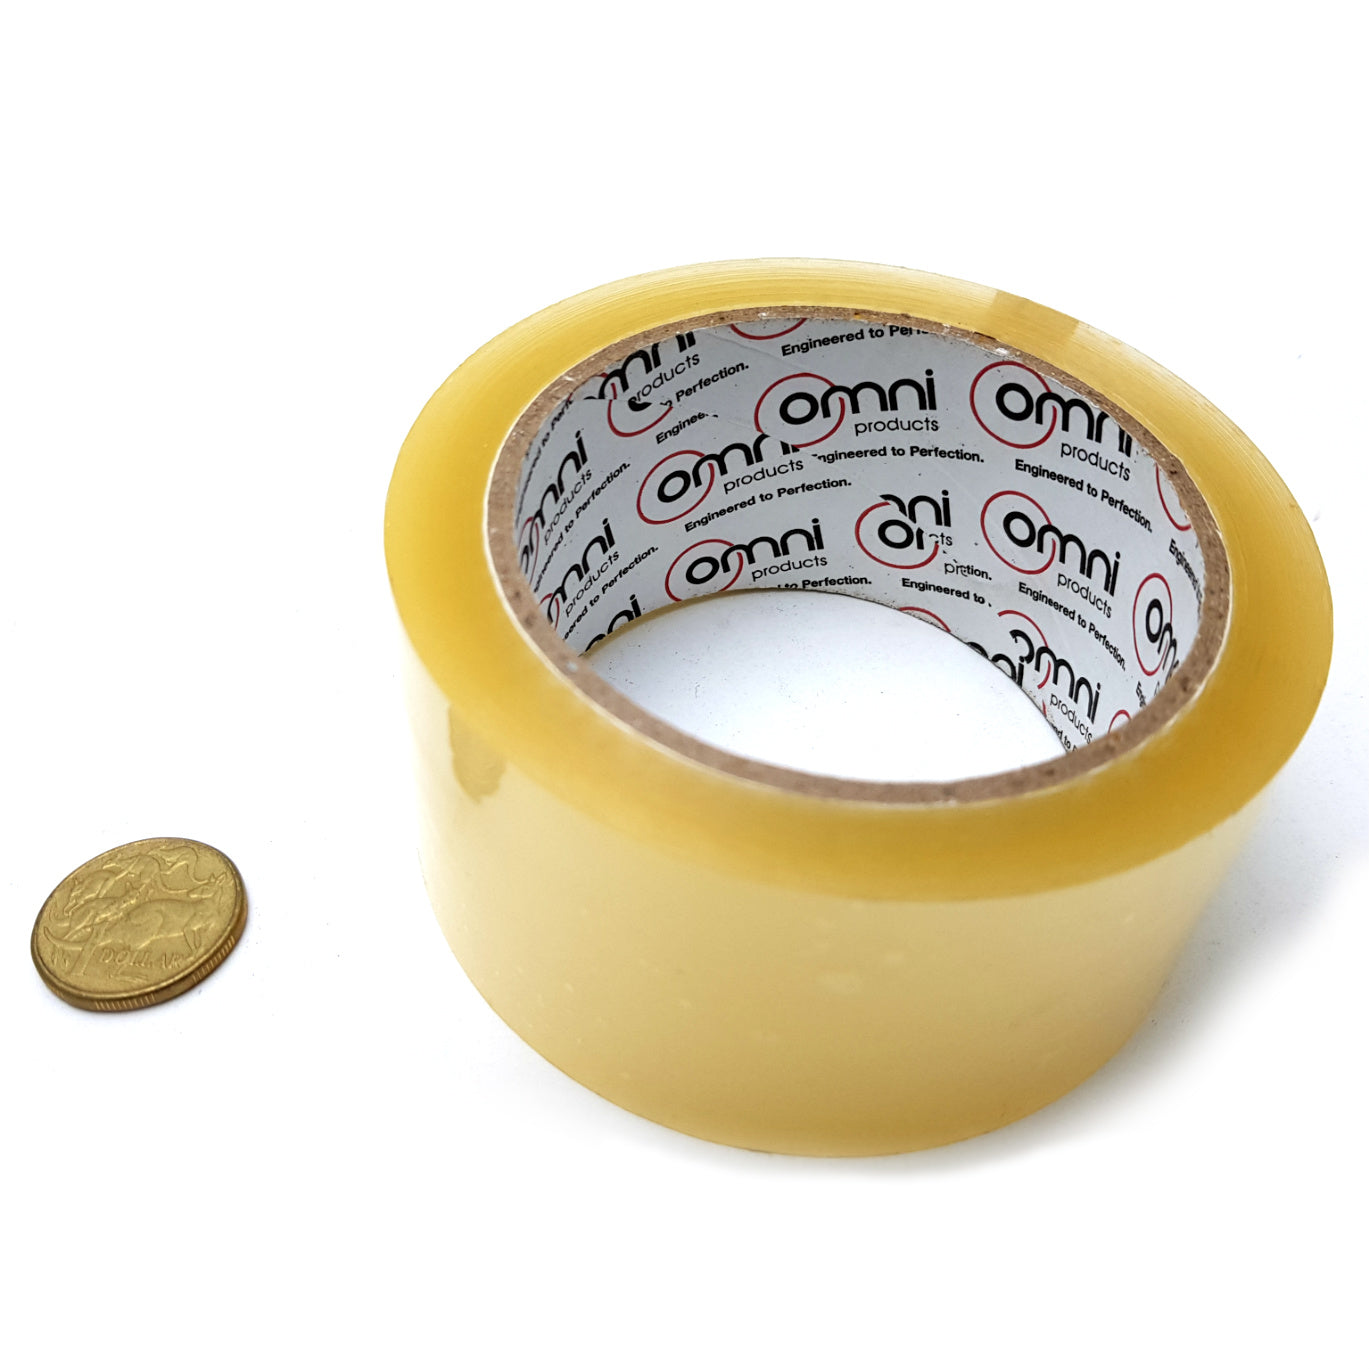 Bulk buy general sticky tape in a box of 36, roll size: 50mm wide x 75m roll. Melbourne, Australia.